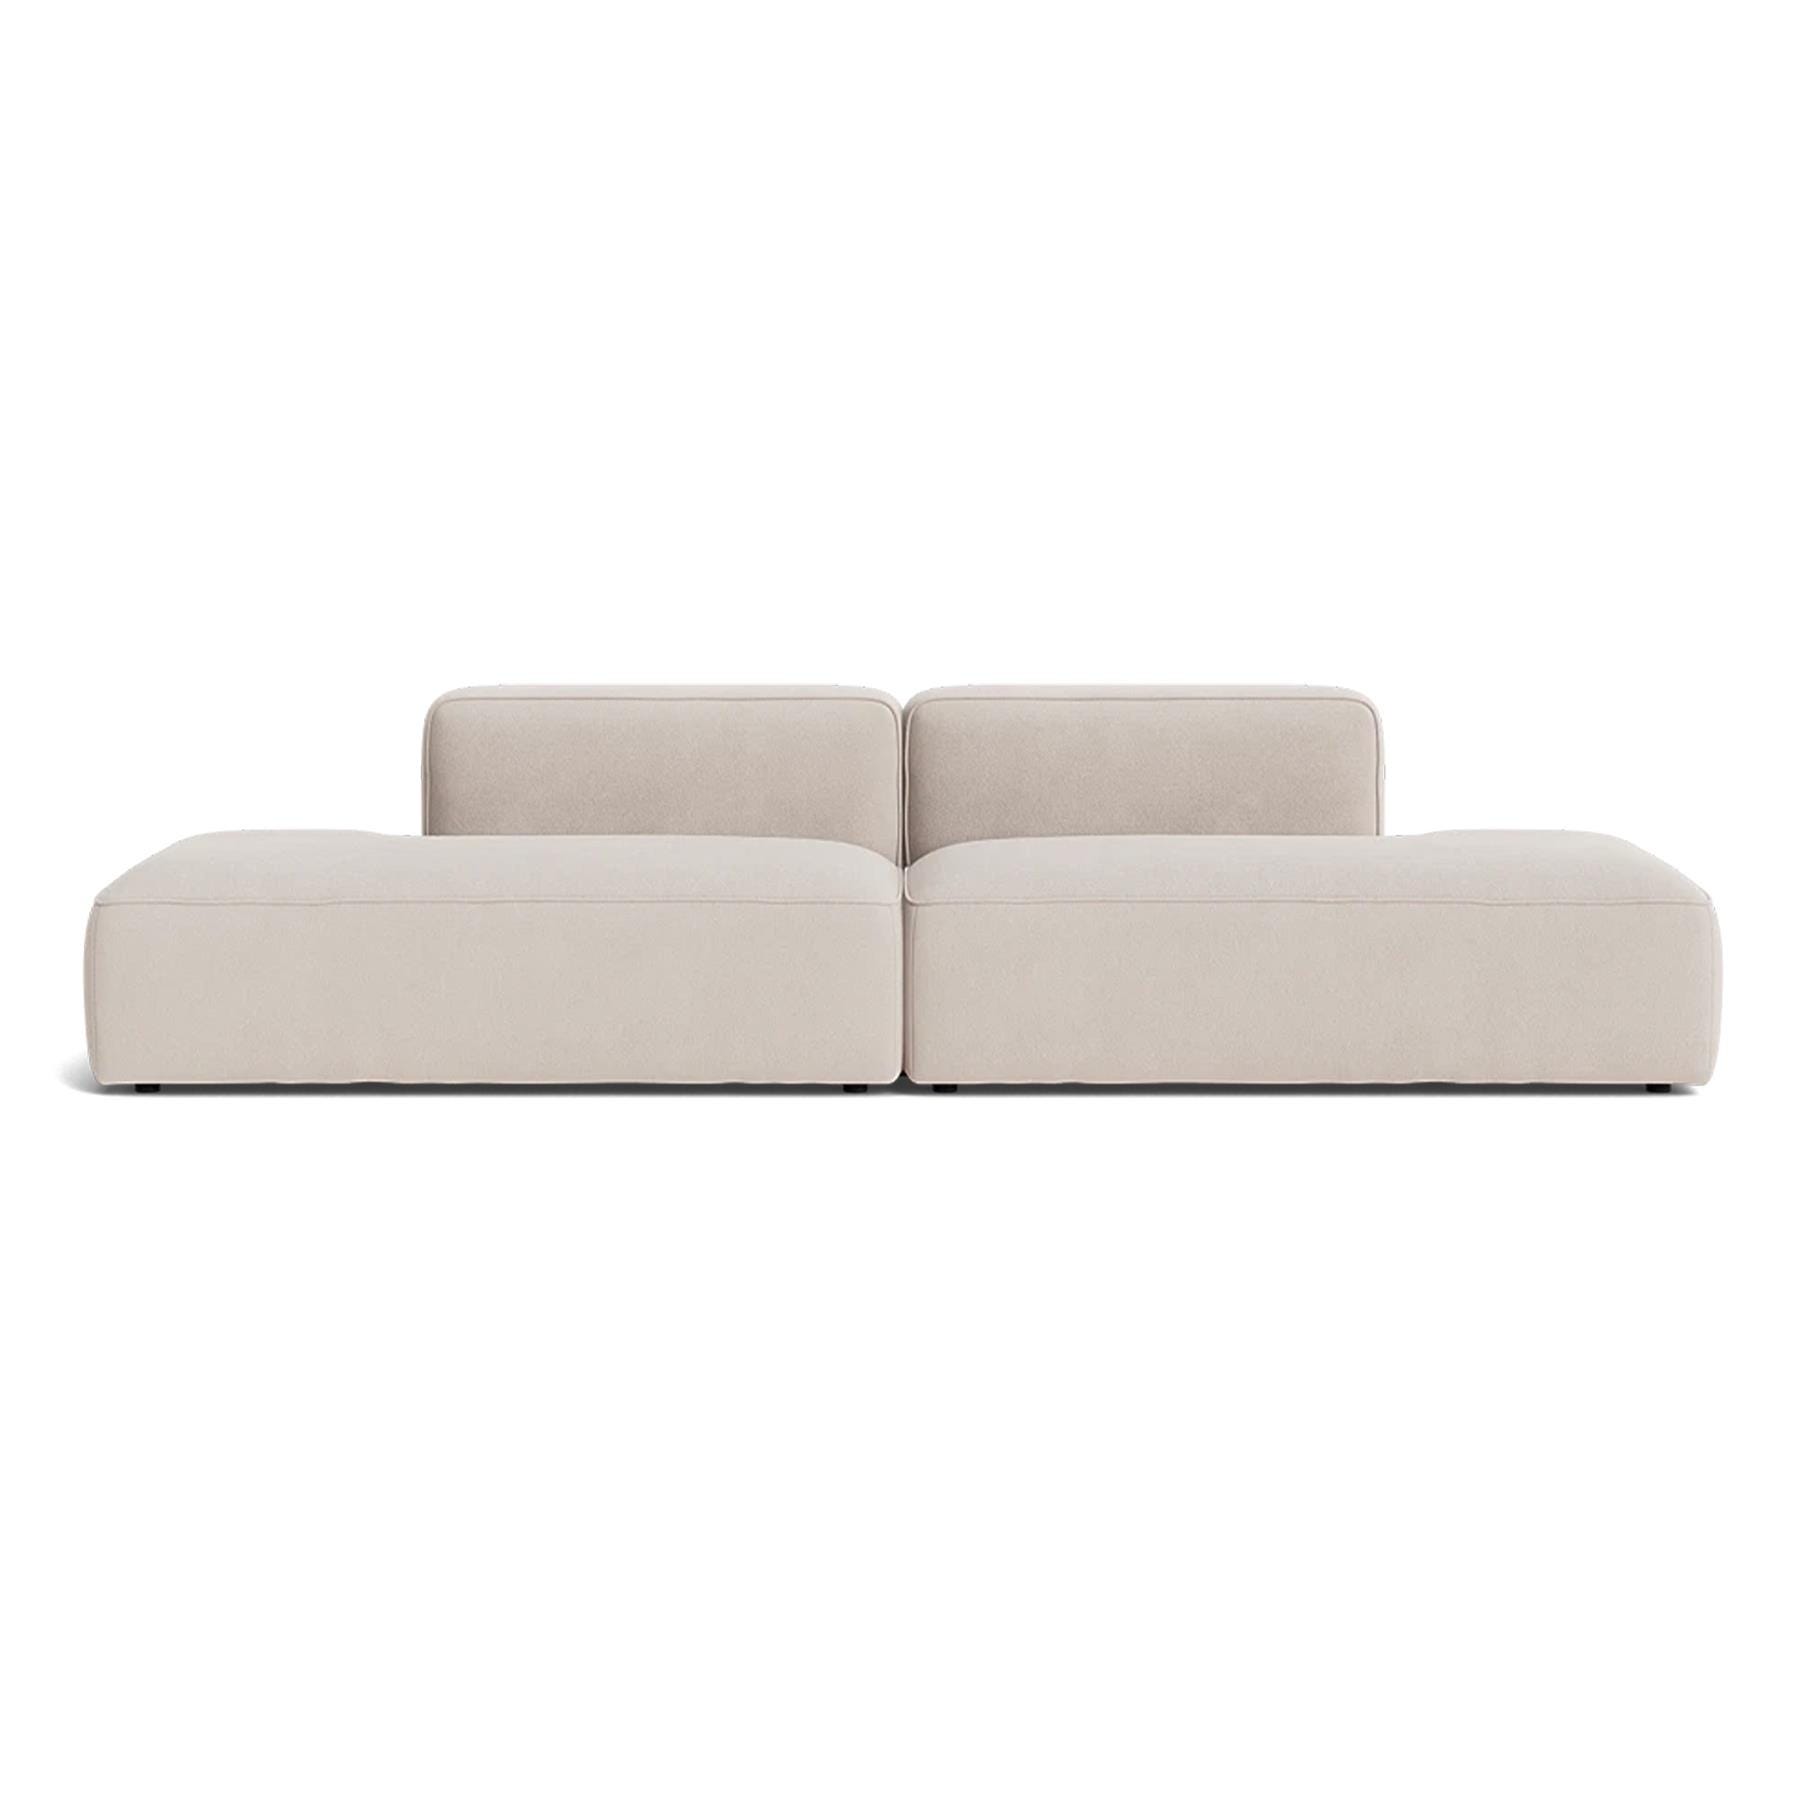 Make Nordic Basecamp Xl Sofa With 2 Open Ends Nordic Velvet 50 Brown Designer Furniture From Holloways Of Ludlow